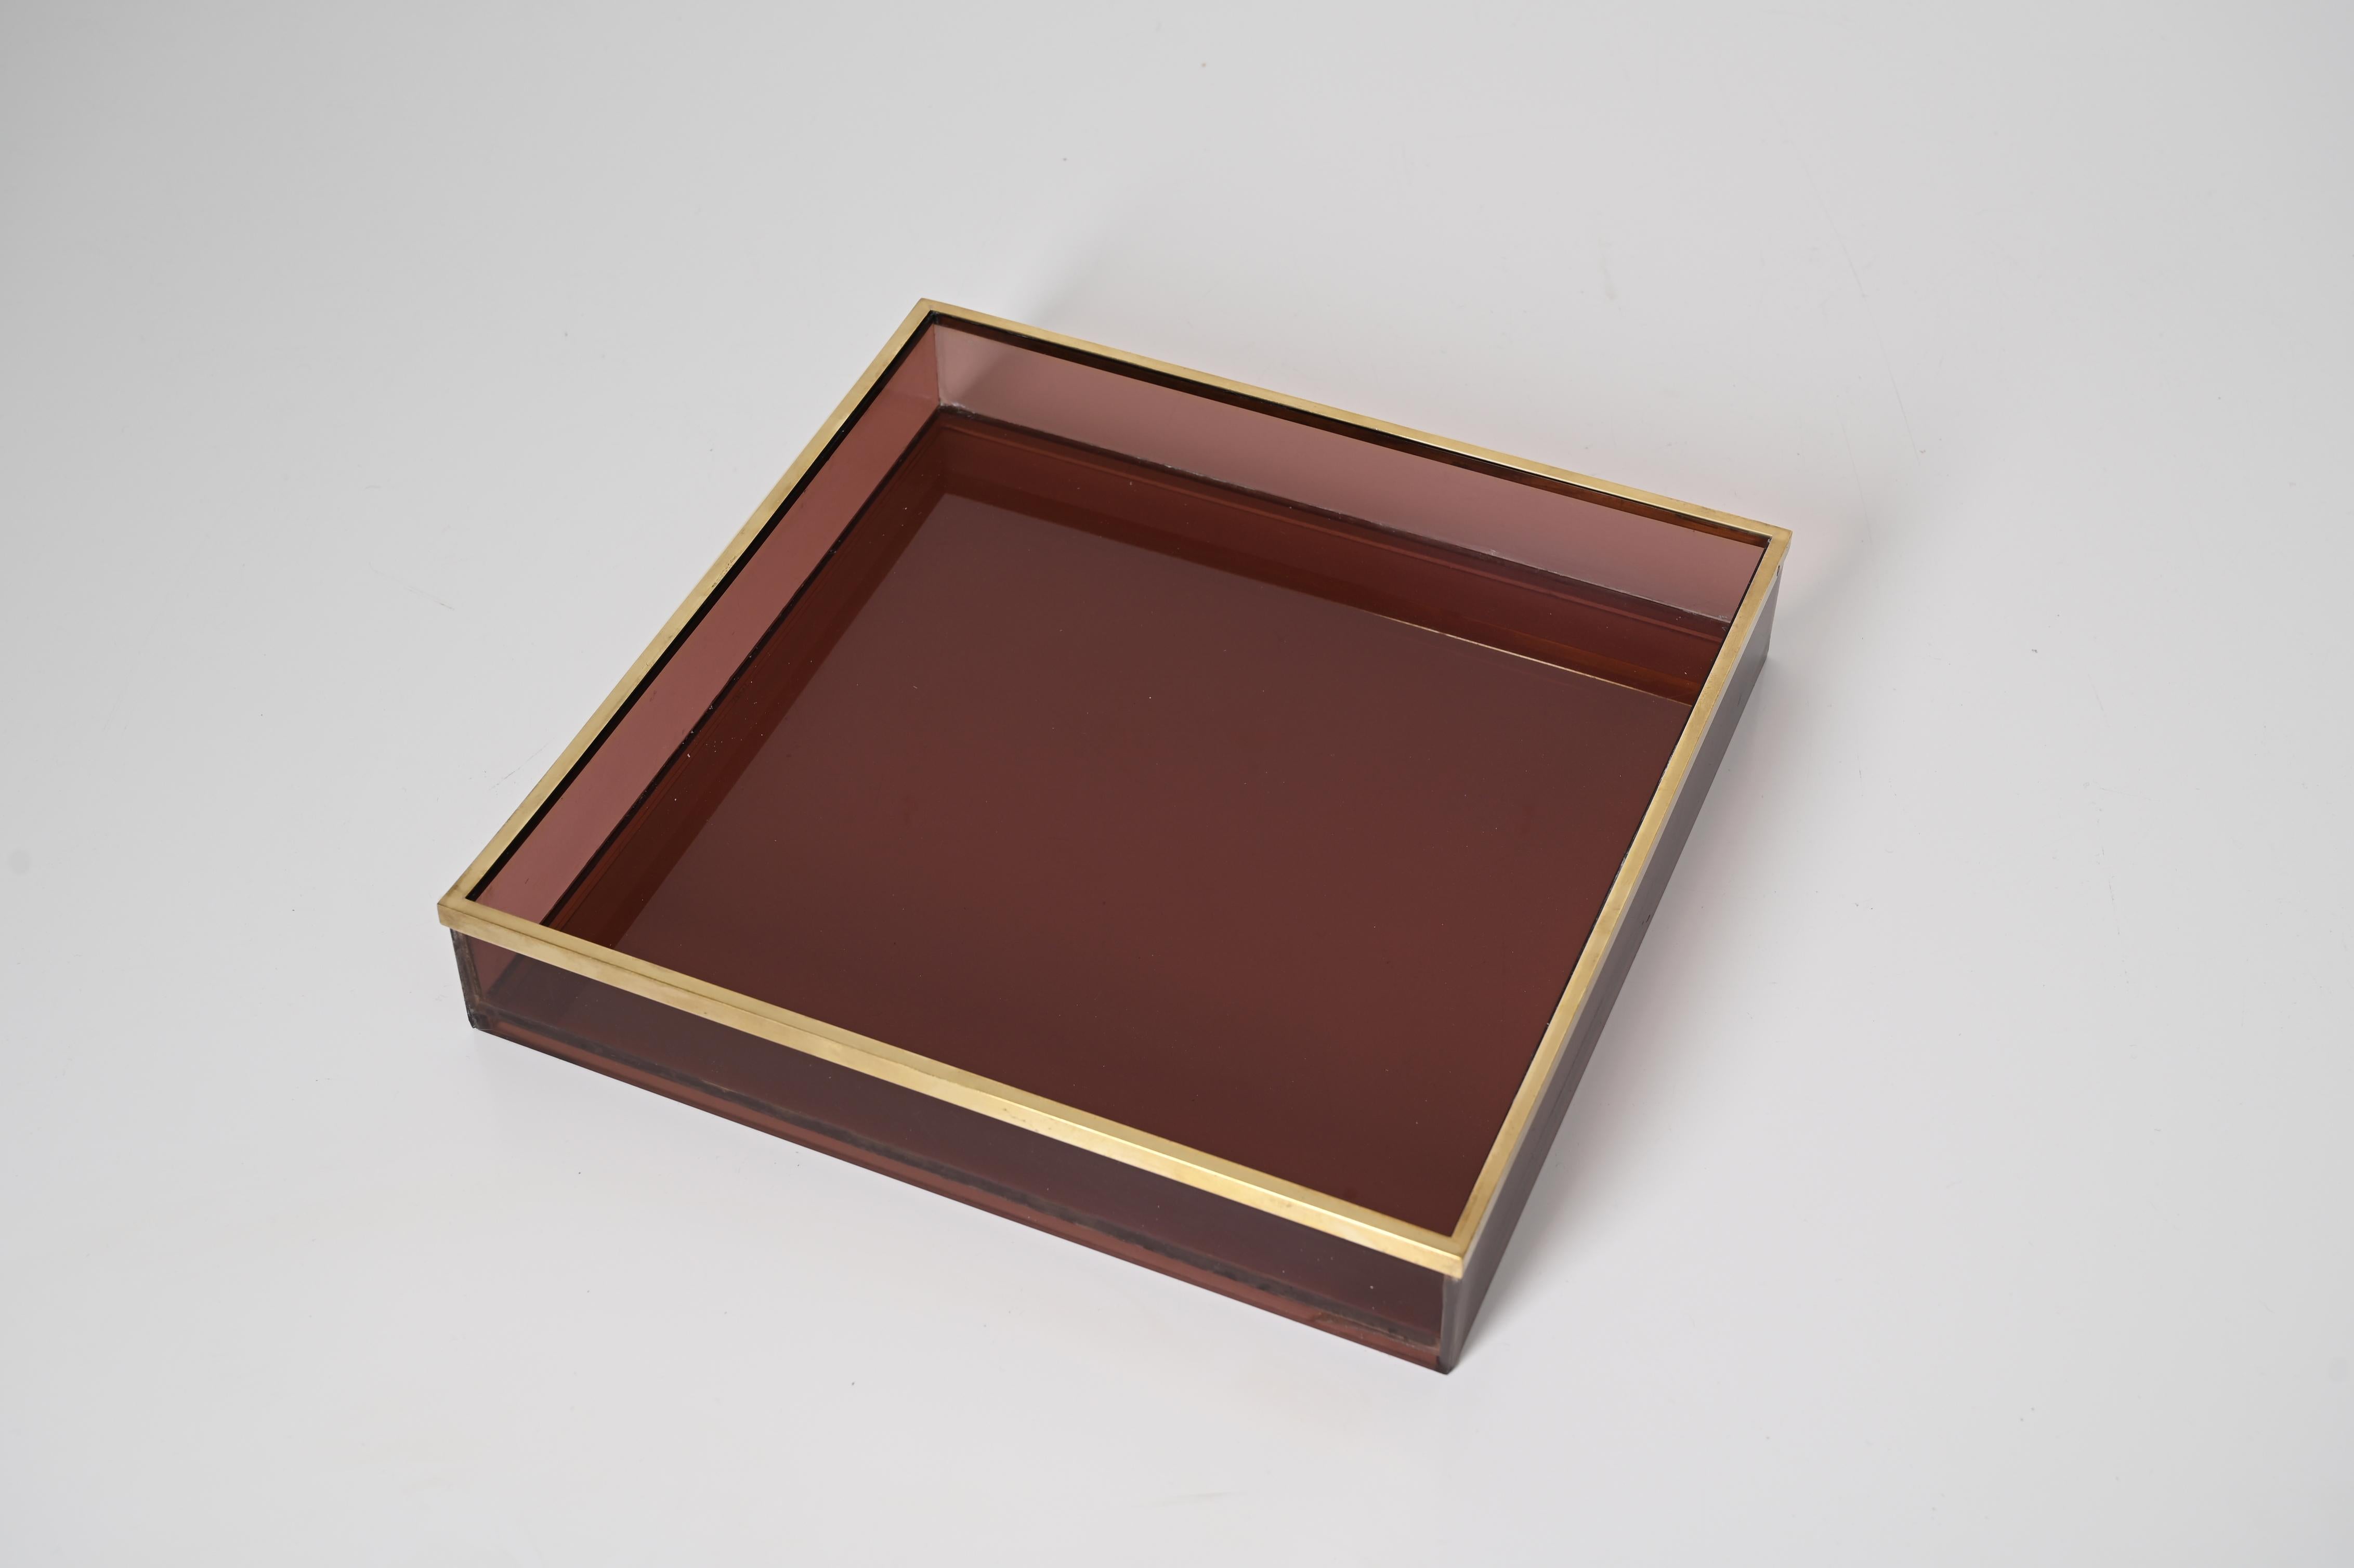 Willy Rizzo Midcentury Pink Lucite and Brass Italian Square Serving Tray, 1970s For Sale 1